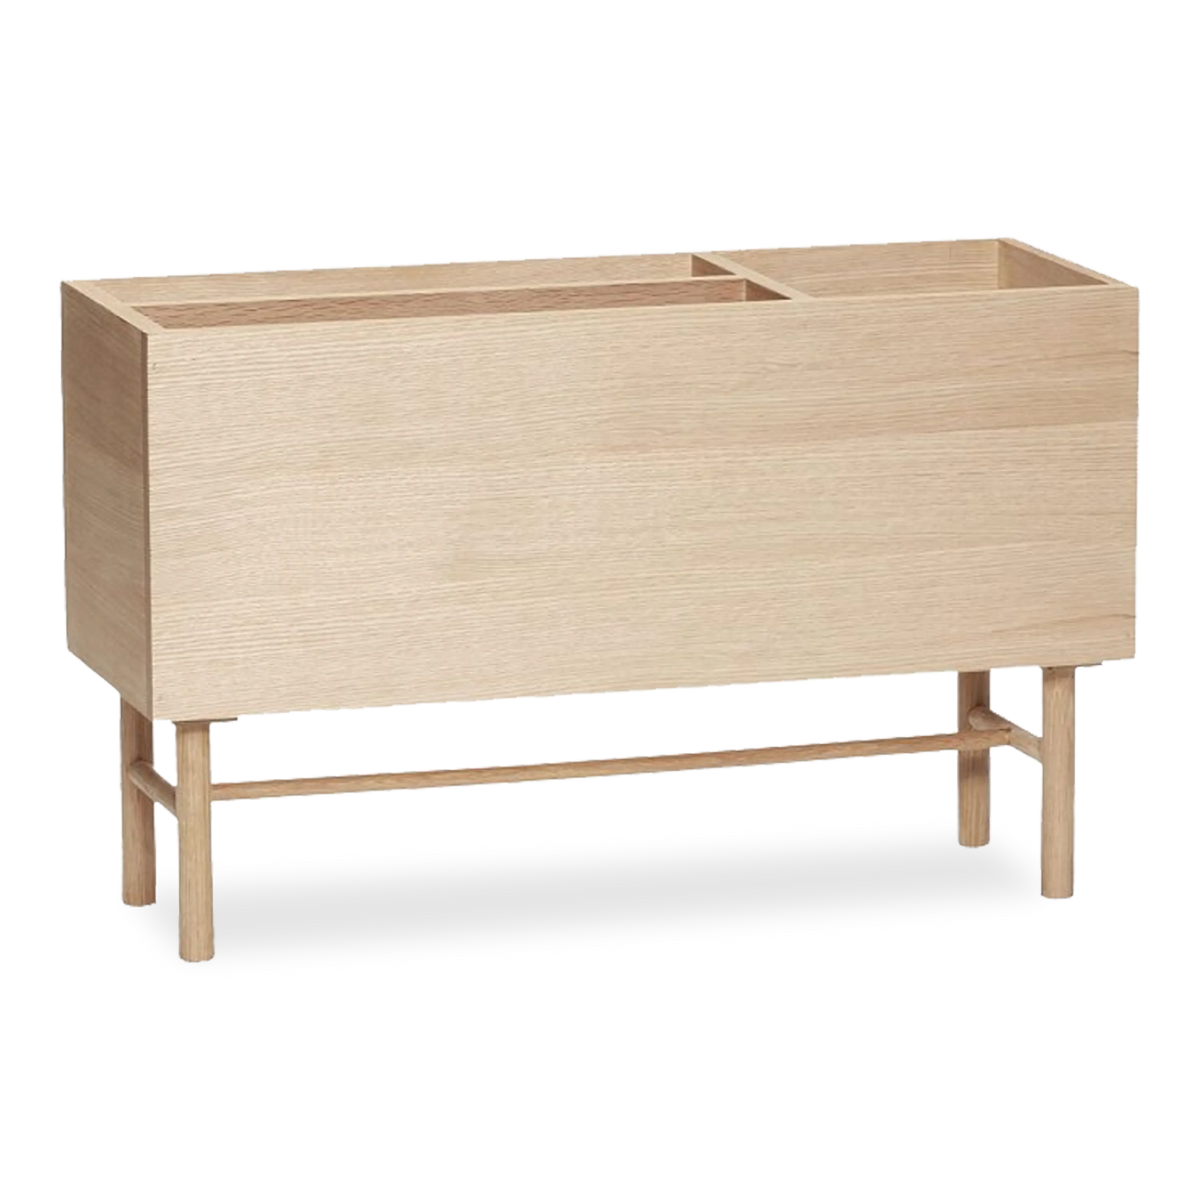 Taking design elements from minimalistic design, the Oak Plant Stand proudly displays its natural grain and its warm pleasant tone.